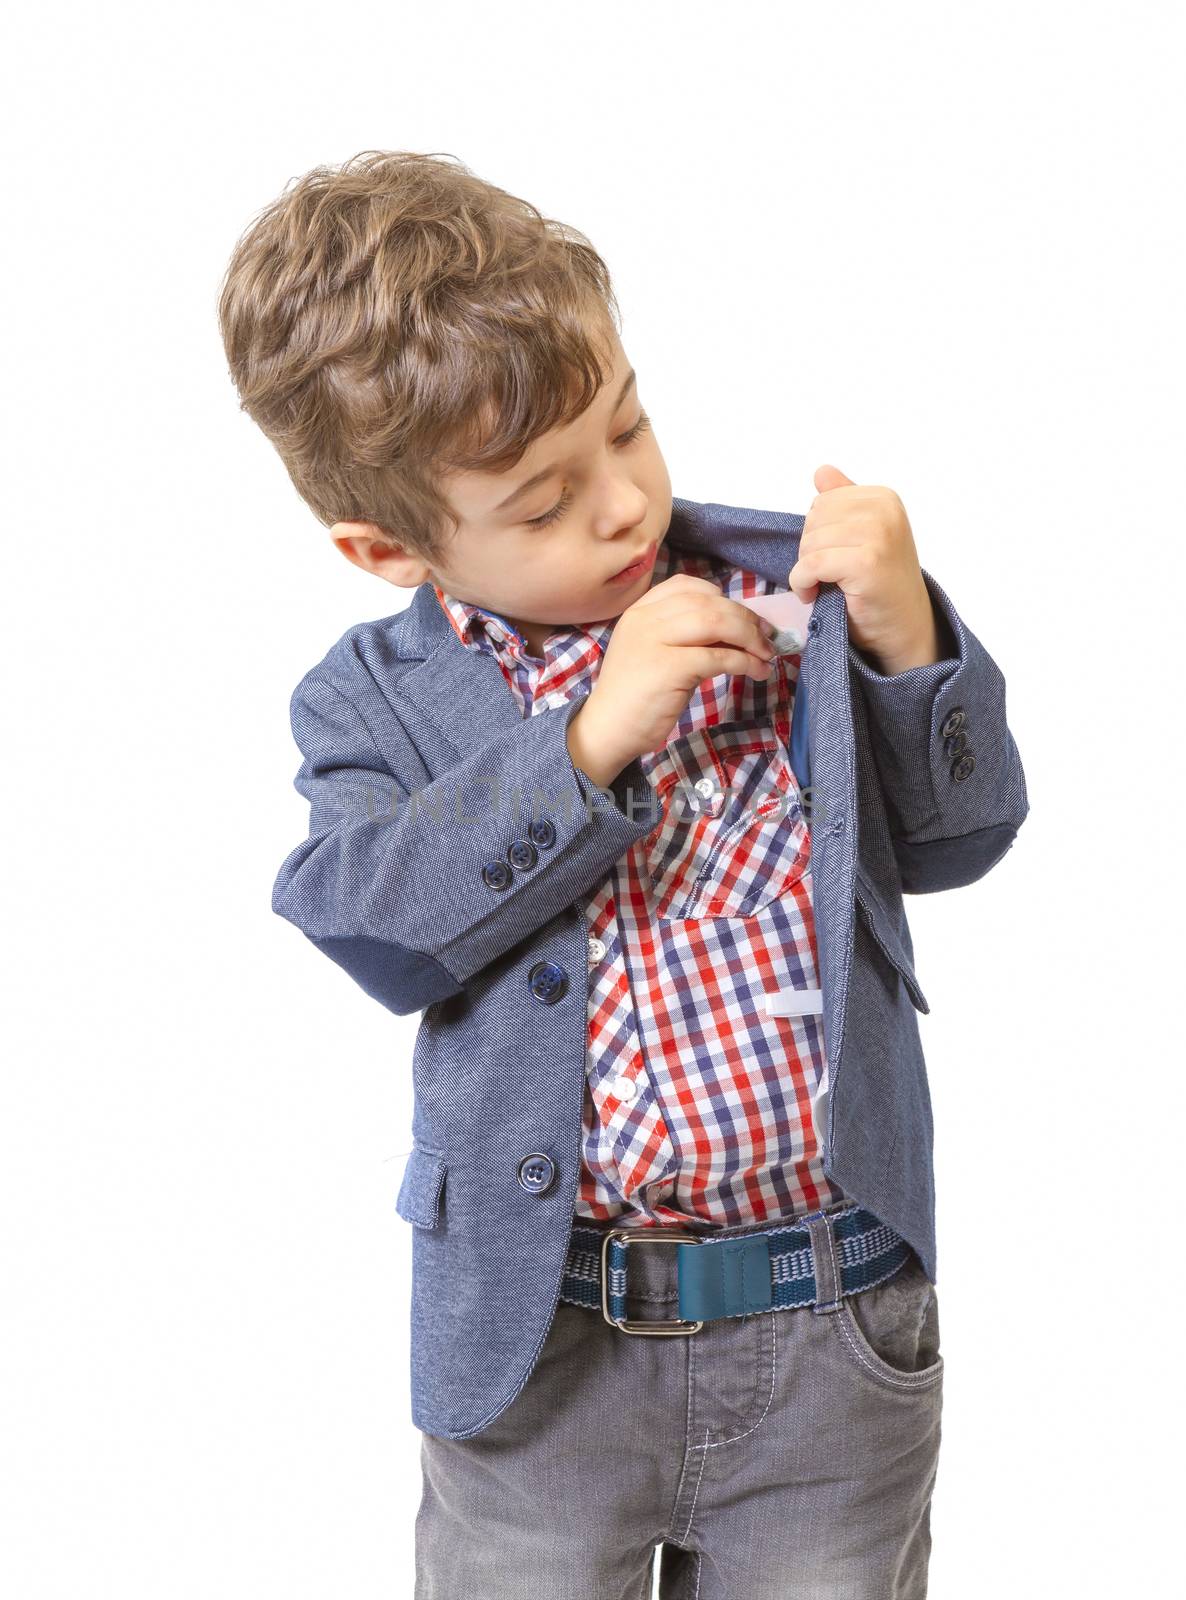 little boy puts money in his pocket by manaemedia